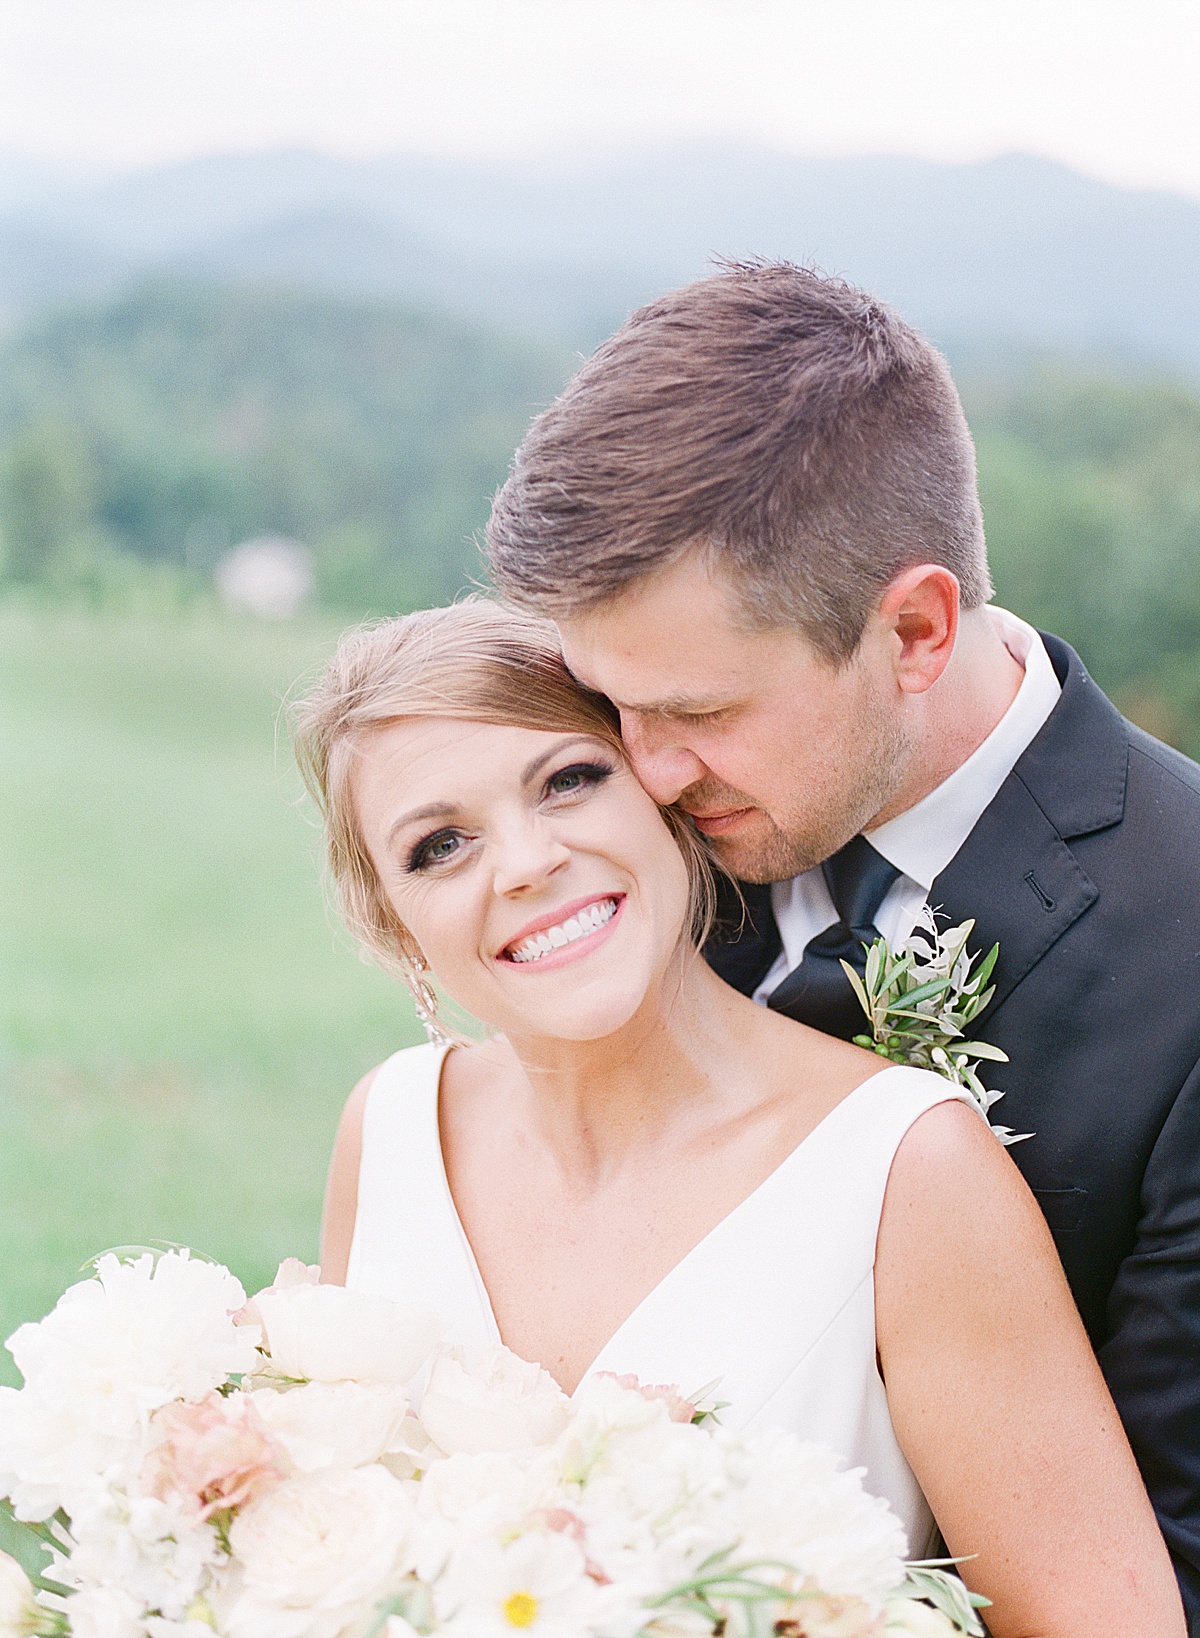 The Ridge Asheville Wedding Bride Smiling at Camera and Groom Snuggling in Photo